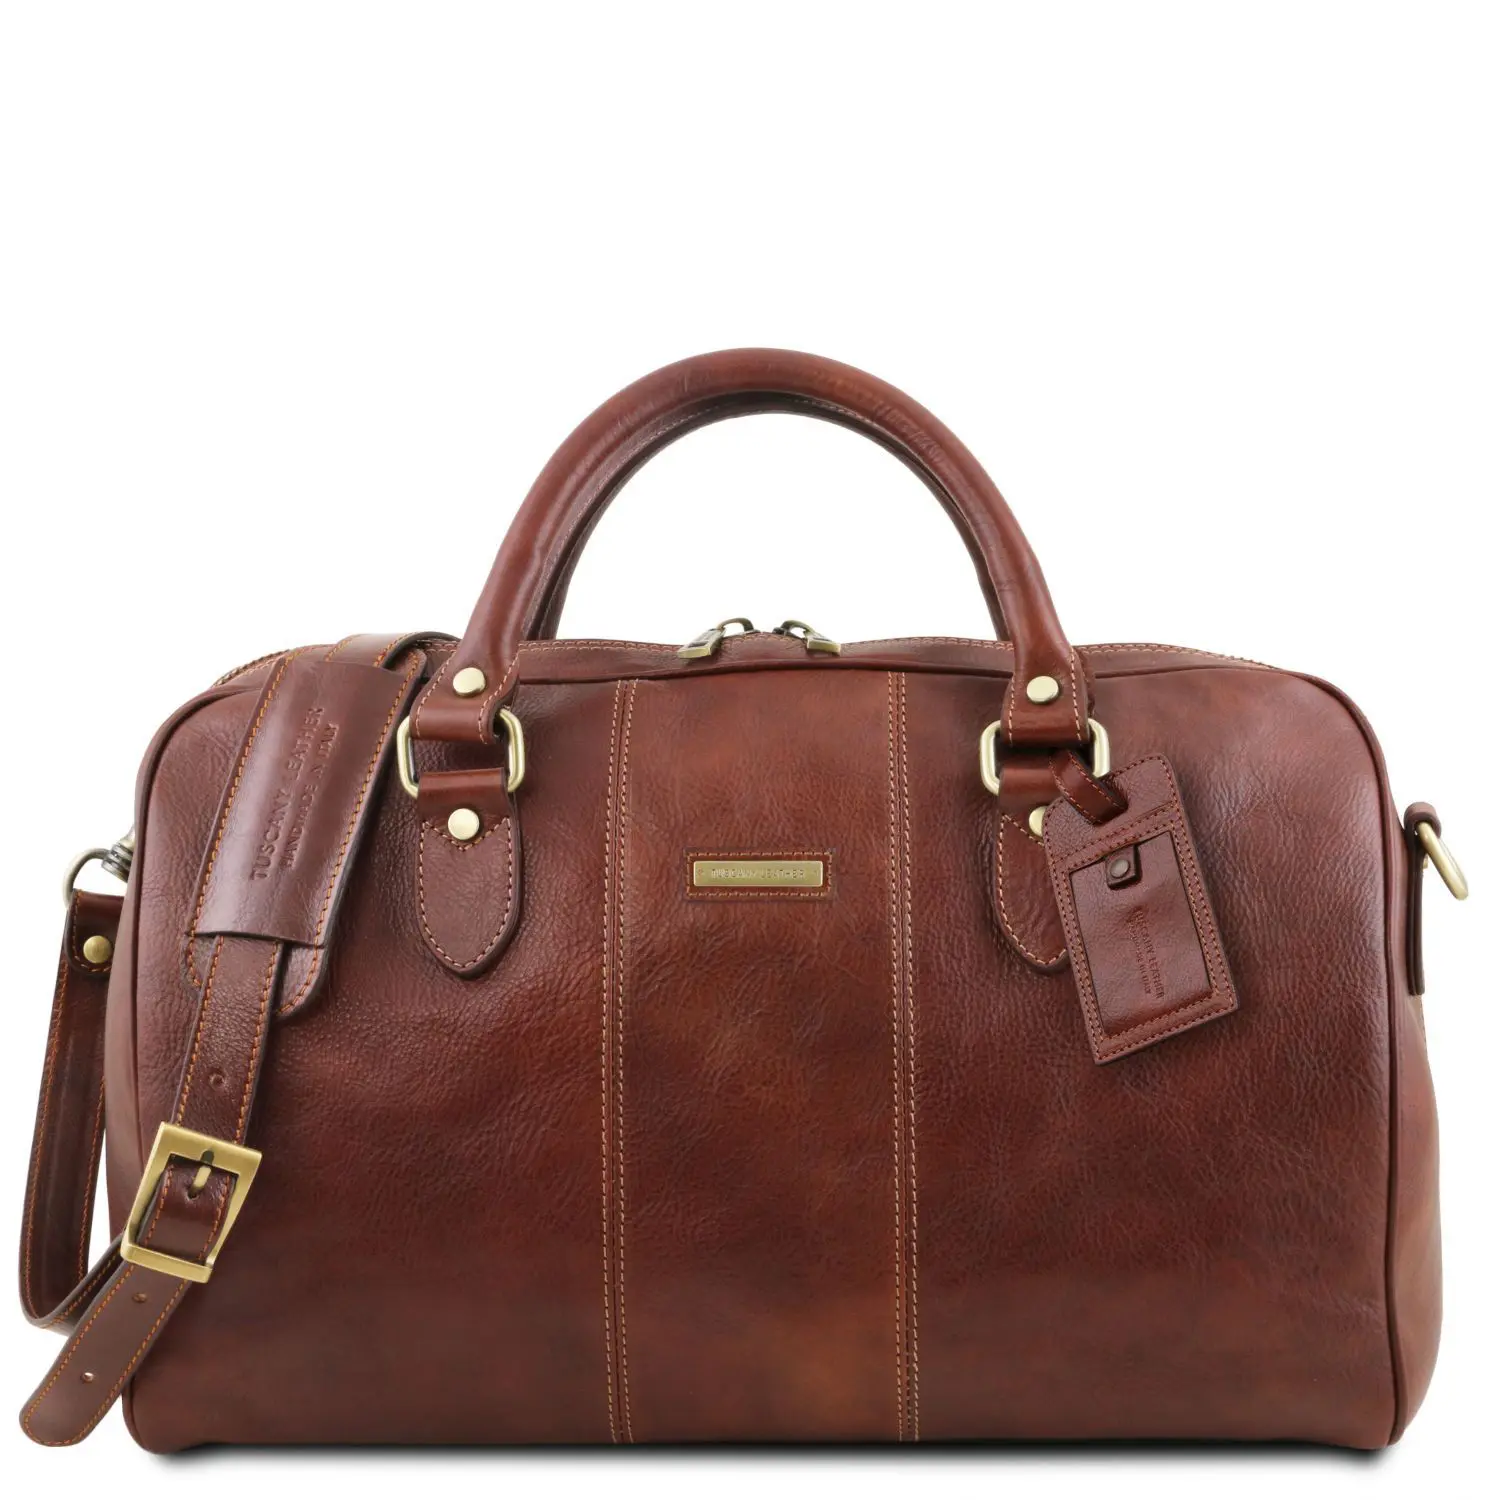 Leather Travel Duffle Bag - Small Size - Lisbon